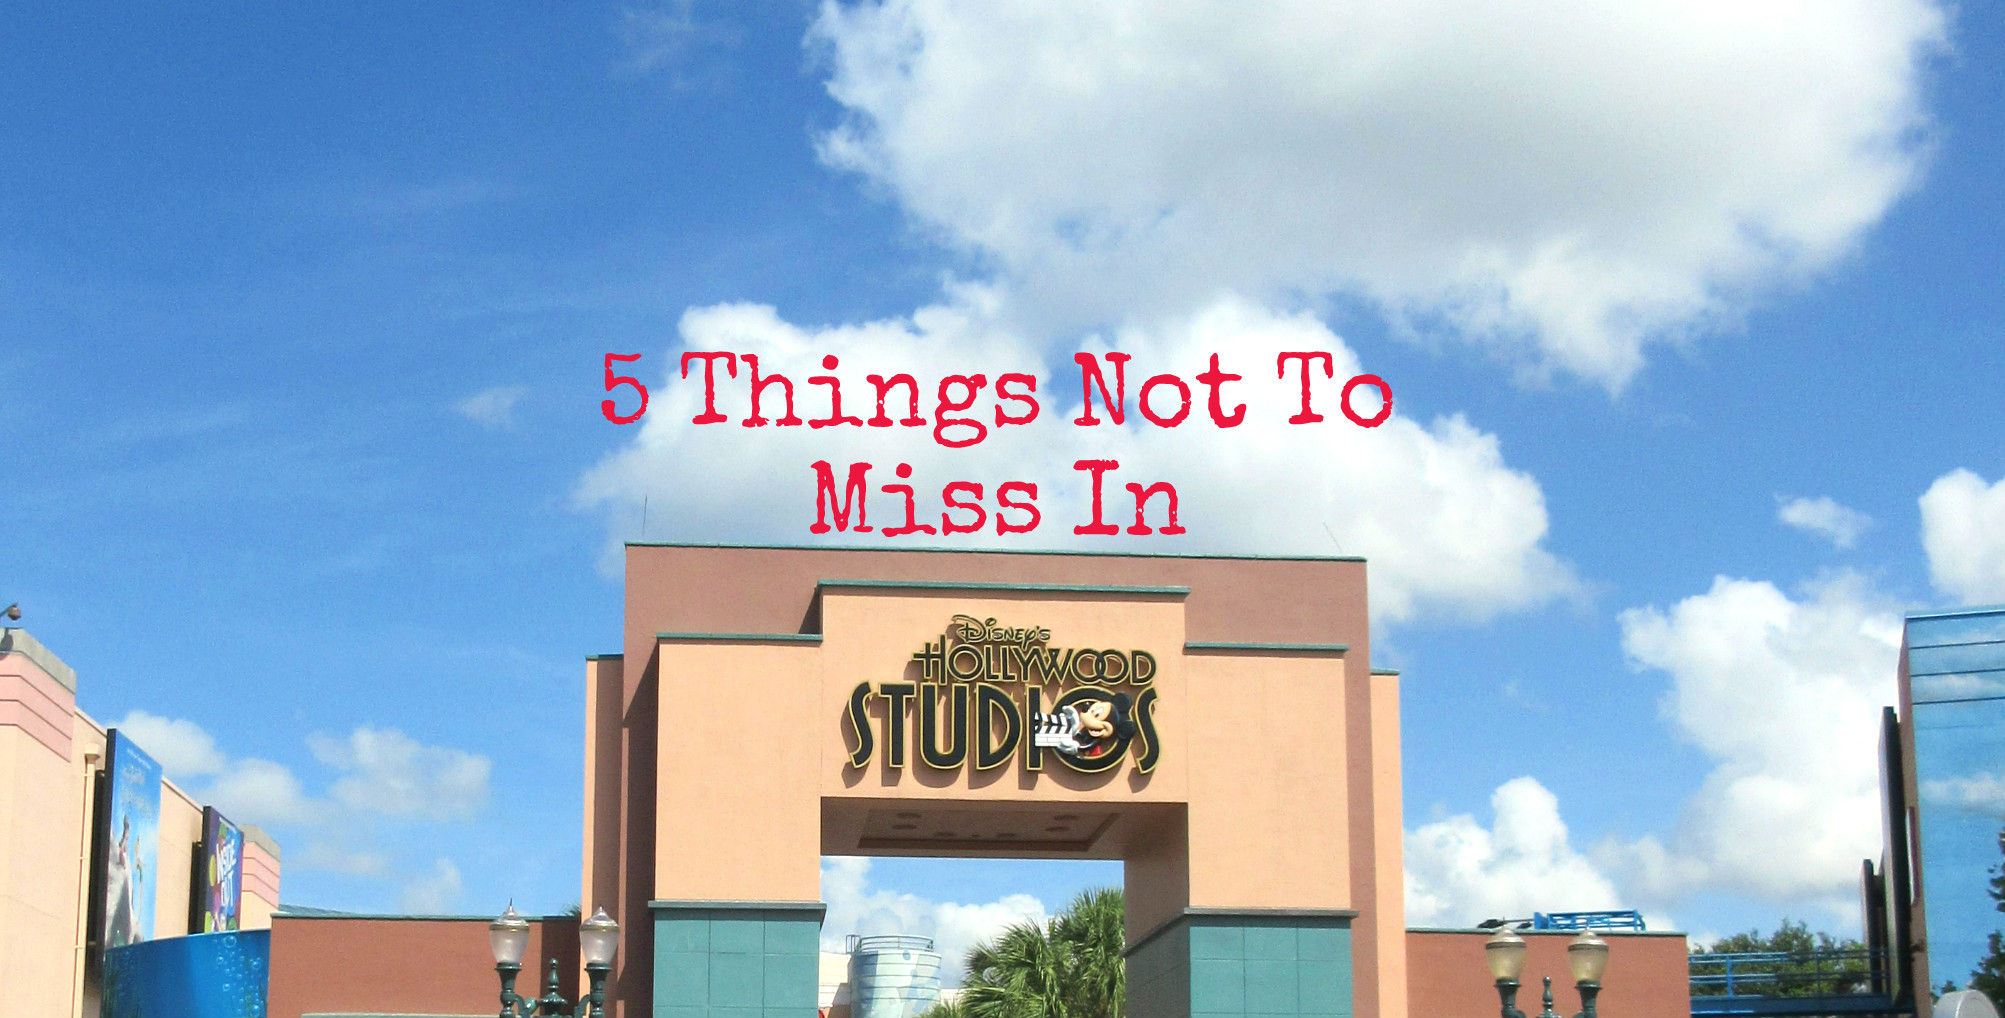 5 Things You Won’t Want to Miss in Disney’s Hollywood Studios